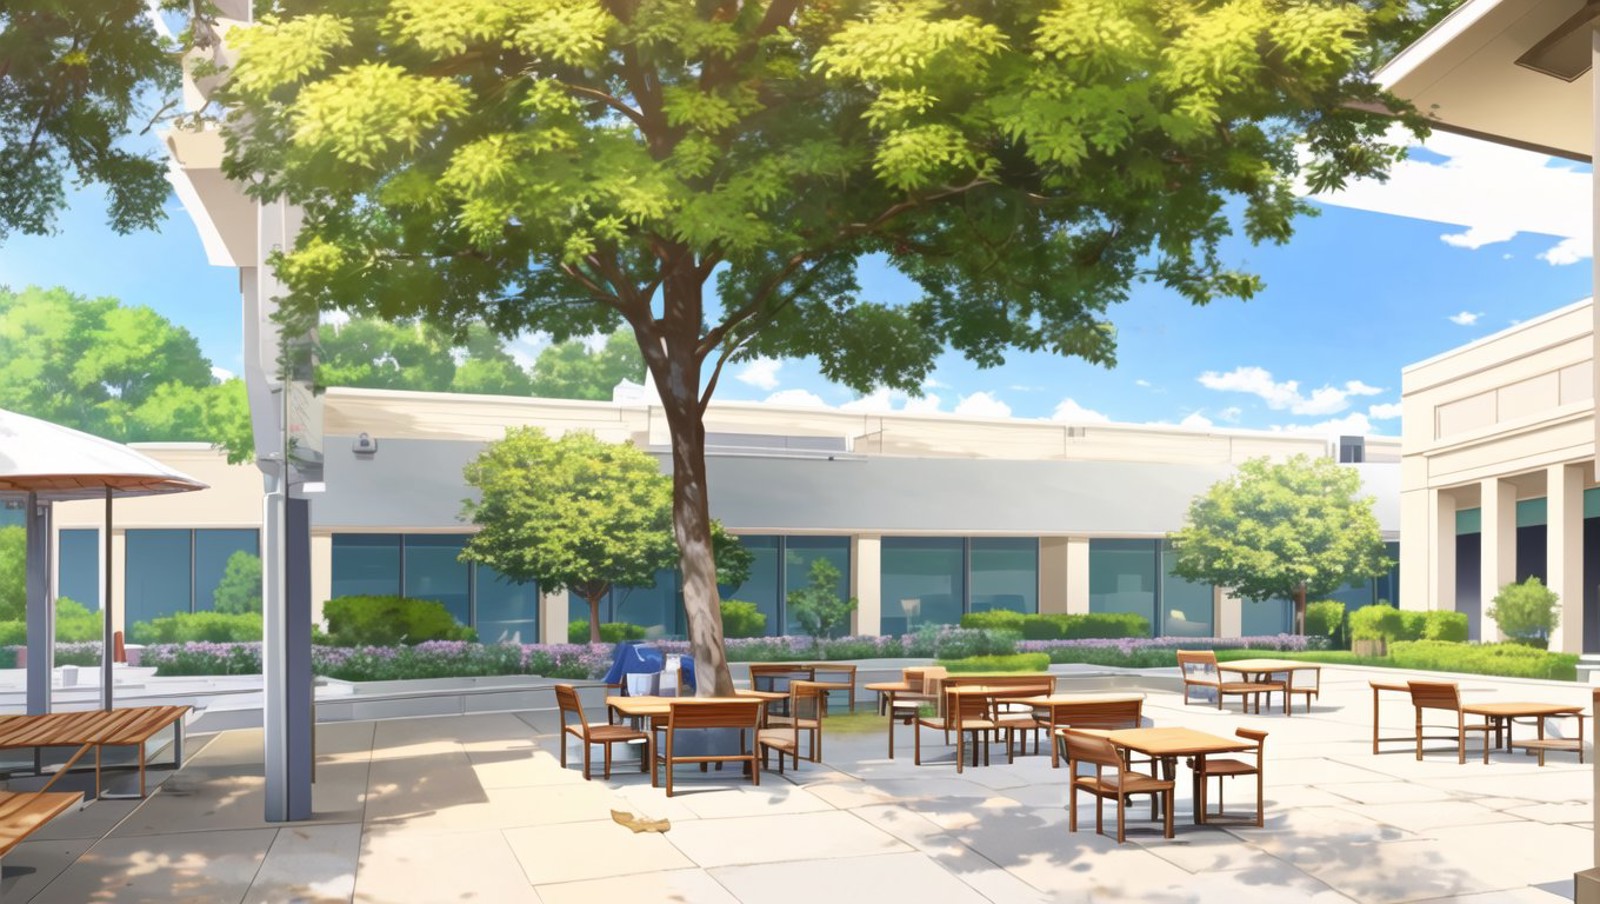 <lora:vn_bg:1> vn_bg, no humans, A serene, peaceful school courtyard, the center of activity during break time, with stude...